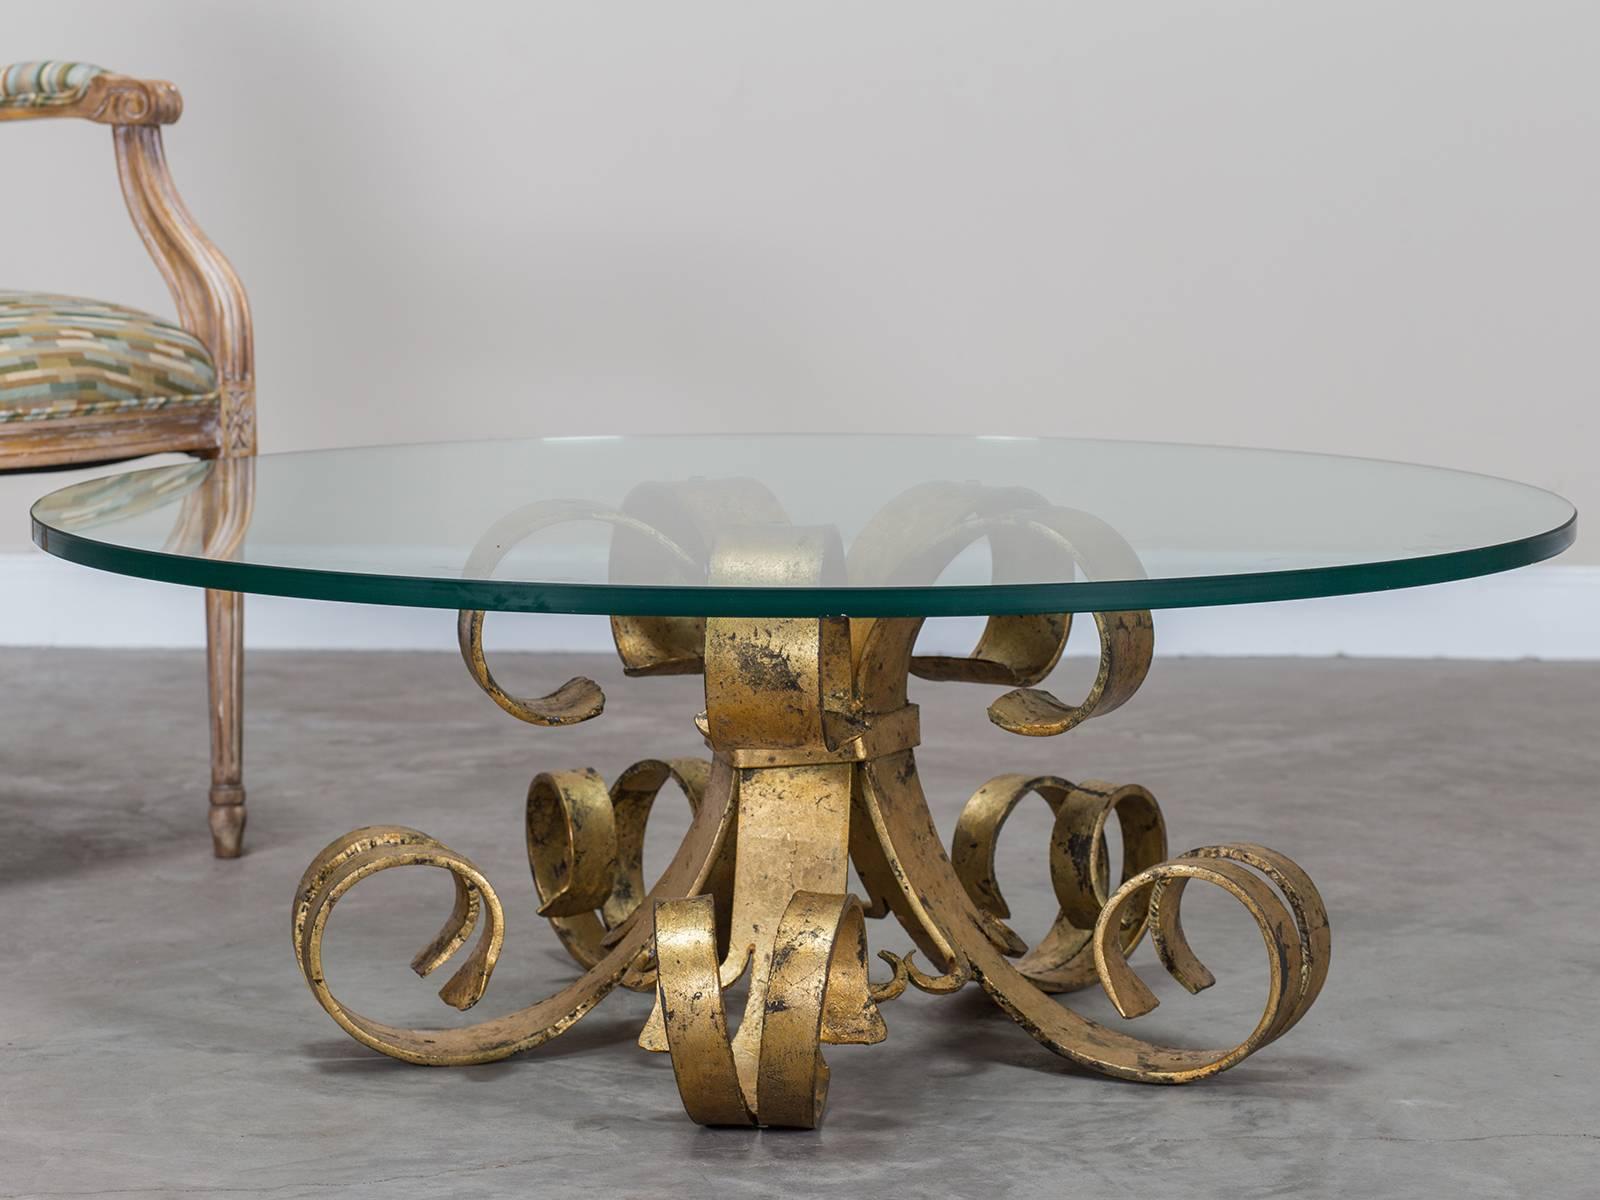 Art Nouveau Gilded Forged Iron Vintage French Cocktail Table, circa 1920